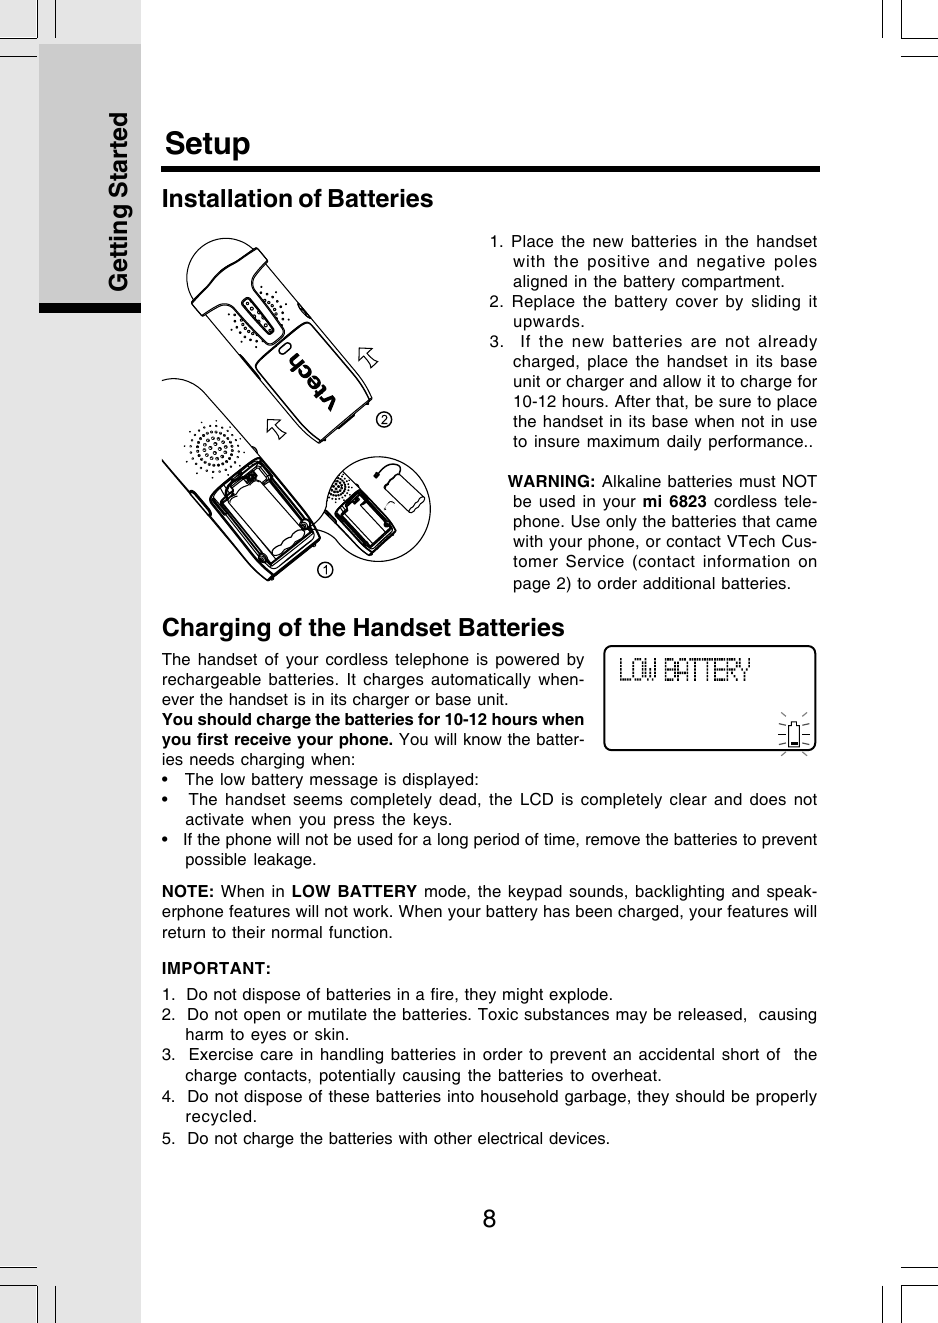 8Getting StartedSetupCharging of the Handset BatteriesThe handset of your cordless telephone is powered byrechargeable batteries. It charges automatically when-ever the handset is in its charger or base unit.You should charge the batteries for 10-12 hours whenyou first receive your phone. You will know the batter-ies needs charging when:•   The low battery message is displayed:•   The handset seems completely dead, the LCD is completely clear and does notactivate when you press the keys.•   If the phone will not be used for a long period of time, remove the batteries to preventpossible leakage.NOTE: When in LOW BATTERY mode, the keypad sounds, backlighting and speak-erphone features will not work. When your battery has been charged, your features willreturn to their normal function.IMPORTANT:1.  Do not dispose of batteries in a fire, they might explode.2.  Do not open or mutilate the batteries. Toxic substances may be released,  causingharm to eyes or skin.3.  Exercise care in handling batteries in order to prevent an accidental short of  thecharge contacts, potentially causing the batteries to overheat.Installation of Batteries1. Place the new batteries in the handsetwith the positive and negative polesaligned in the battery compartment.2. Replace the battery cover by sliding itupwards.3.  If the new batteries are not alreadycharged, place the handset in its baseunit or charger and allow it to charge for10-12 hours. After that, be sure to placethe handset in its base when not in useto insure maximum daily performance..   WARNING: Alkaline batteries must NOTbe used in your mi 6823 cordless tele-phone. Use only the batteries that camewith your phone, or contact VTech Cus-tomer Service (contact information onpage 2) to order additional batteries.4.  Do not dispose of these batteries into household garbage, they should be properlyrecycled.5.  Do not charge the batteries with other electrical devices.